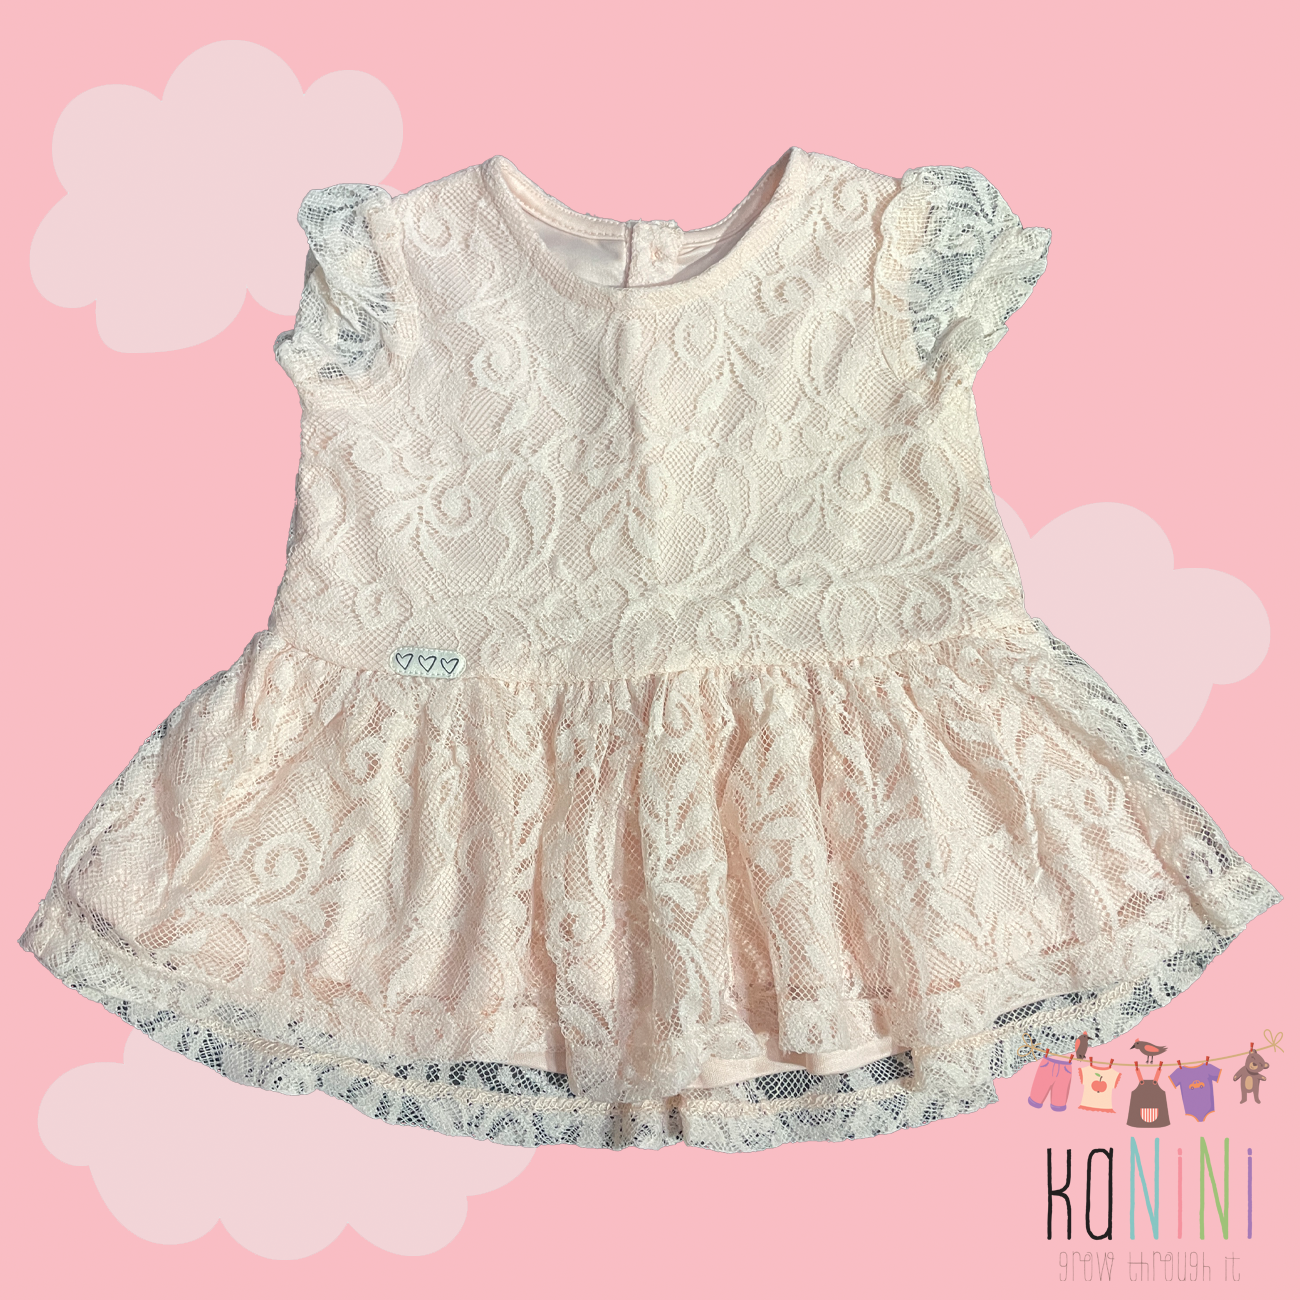 Featured image for “Woolworths 6 - 12 Months Girls Pink Lace Dress”